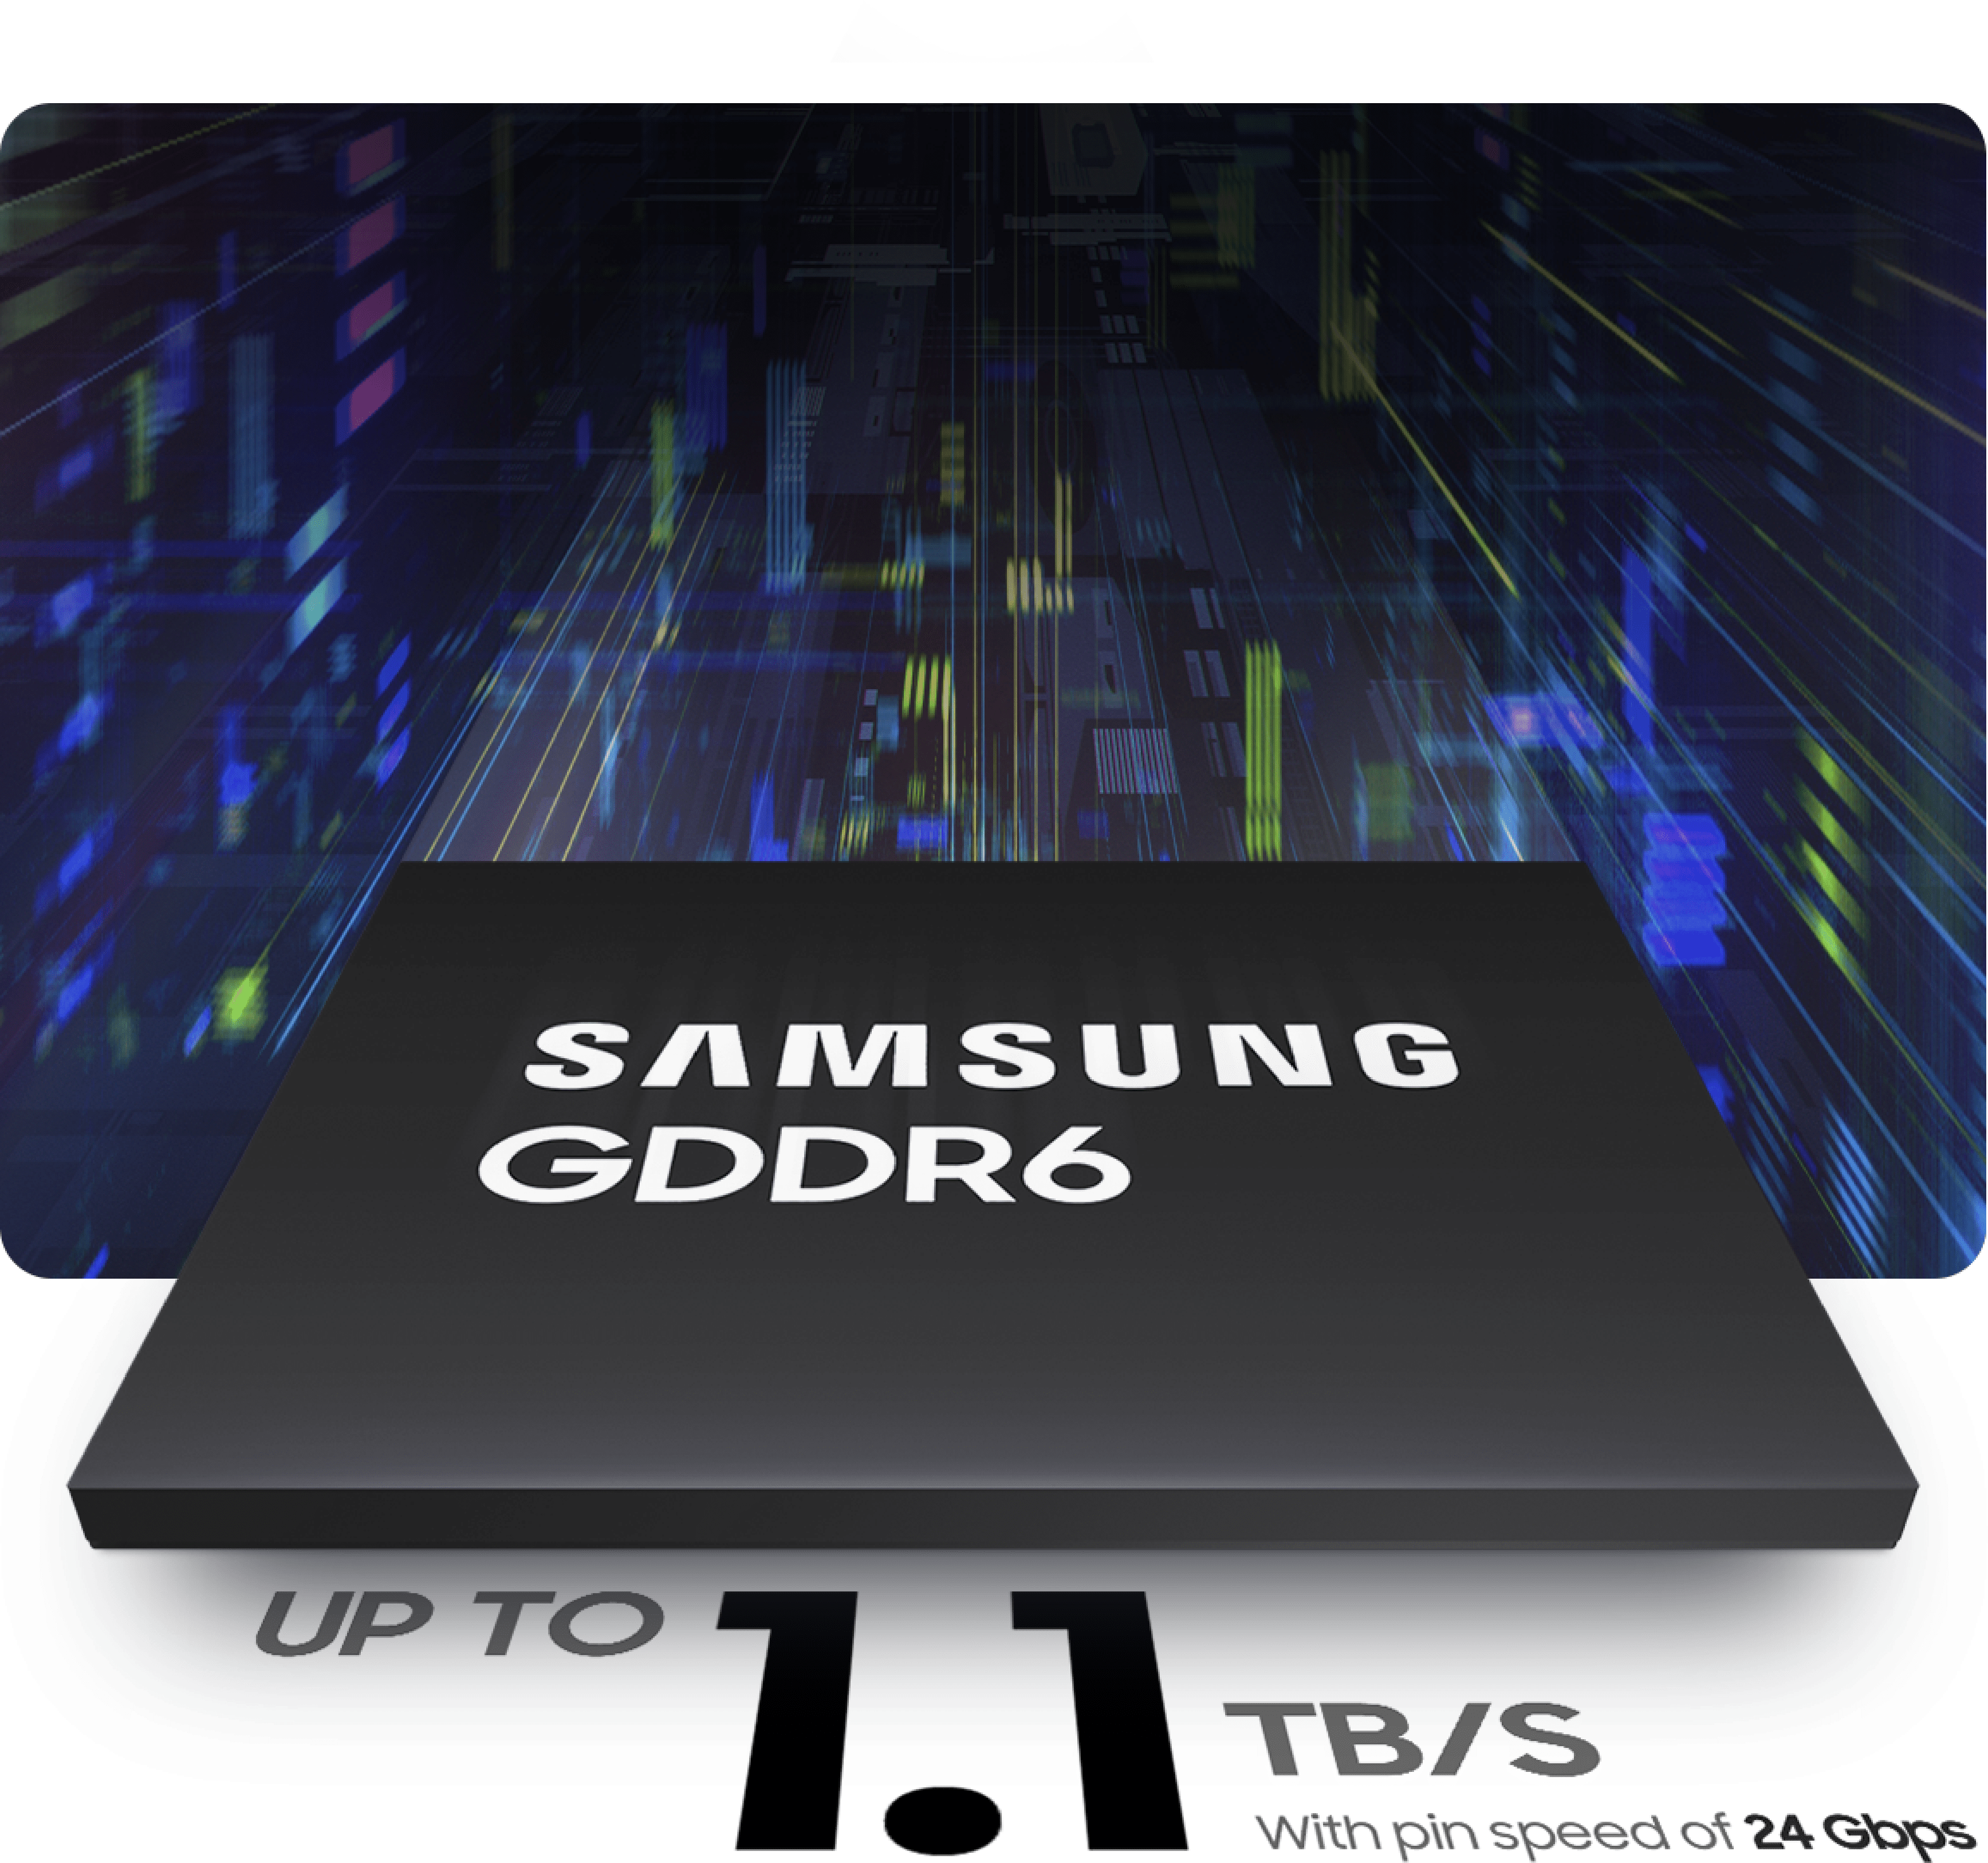 Samsung GDDR6 has a bandwidth of up to 1.1 TB/s and speeds of up to 24 Gbps.